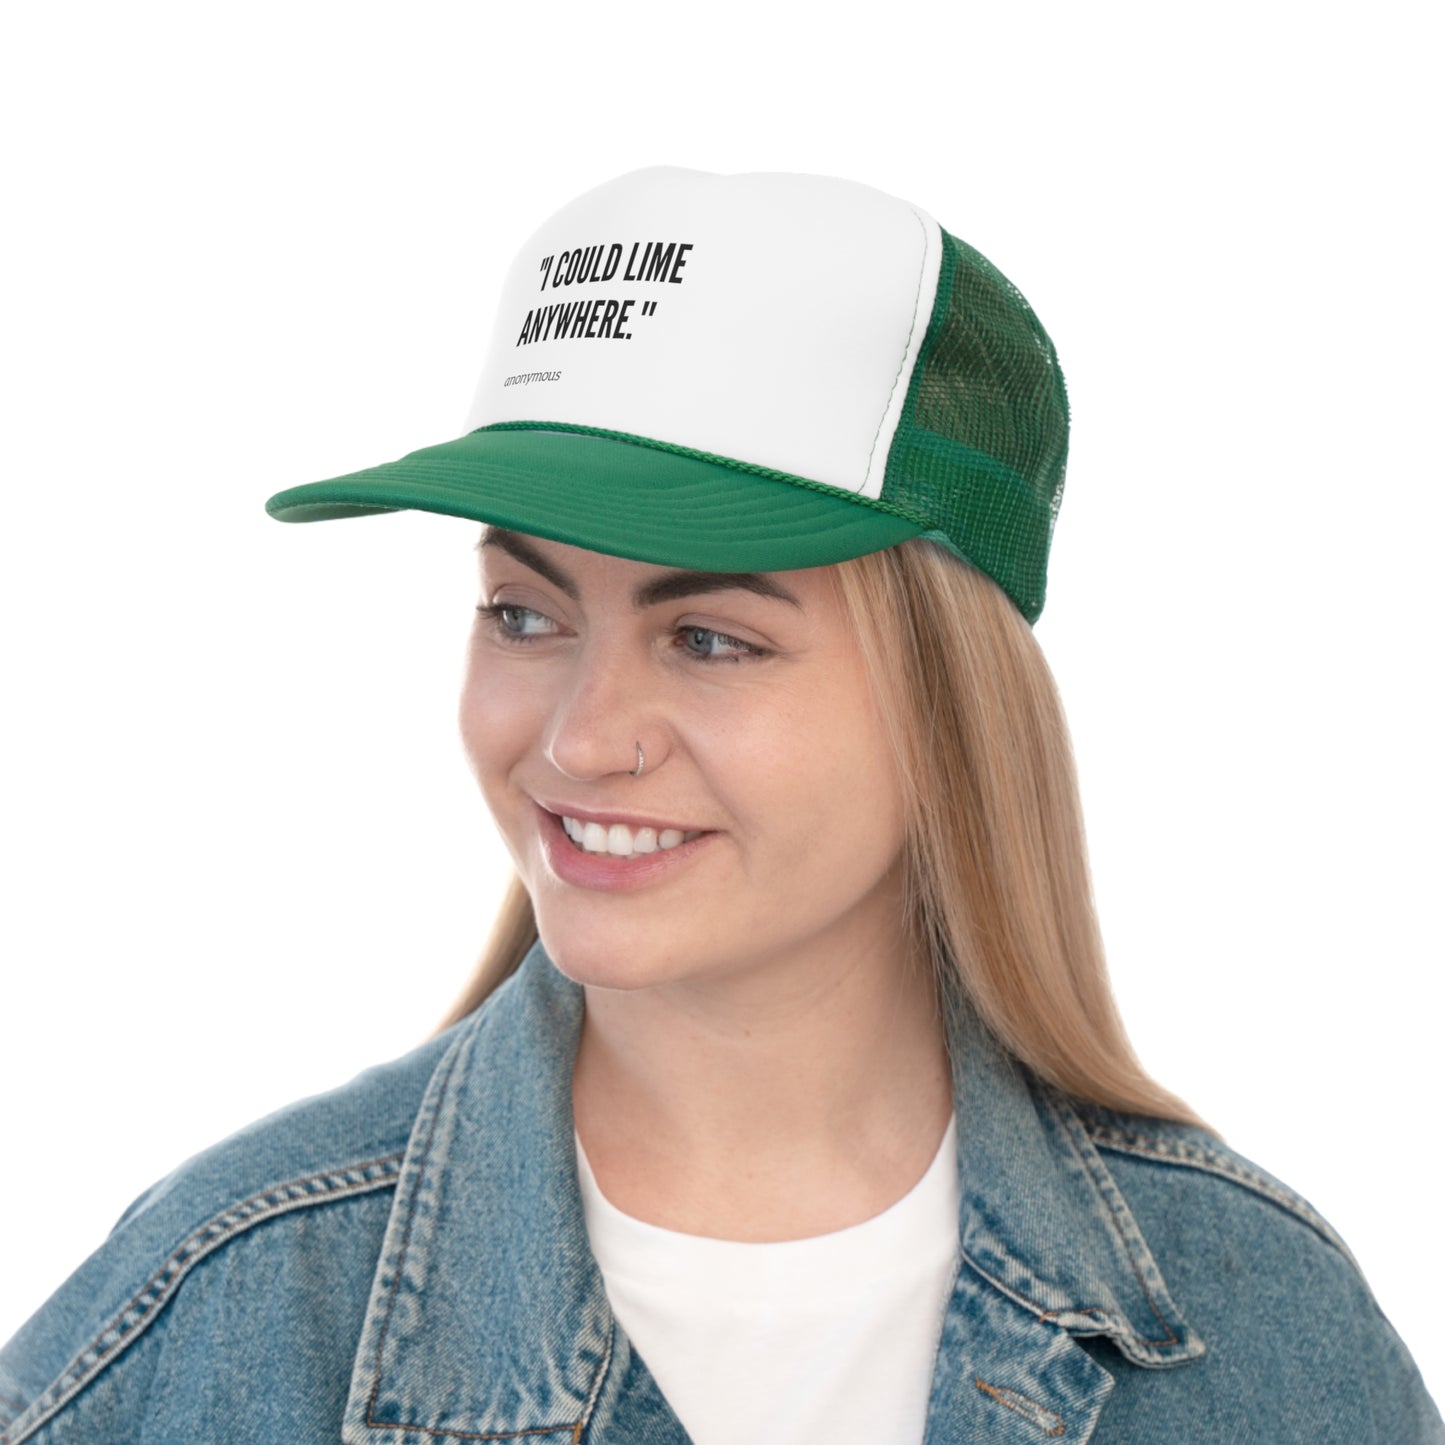 I could lime anywhere Trucker Caps